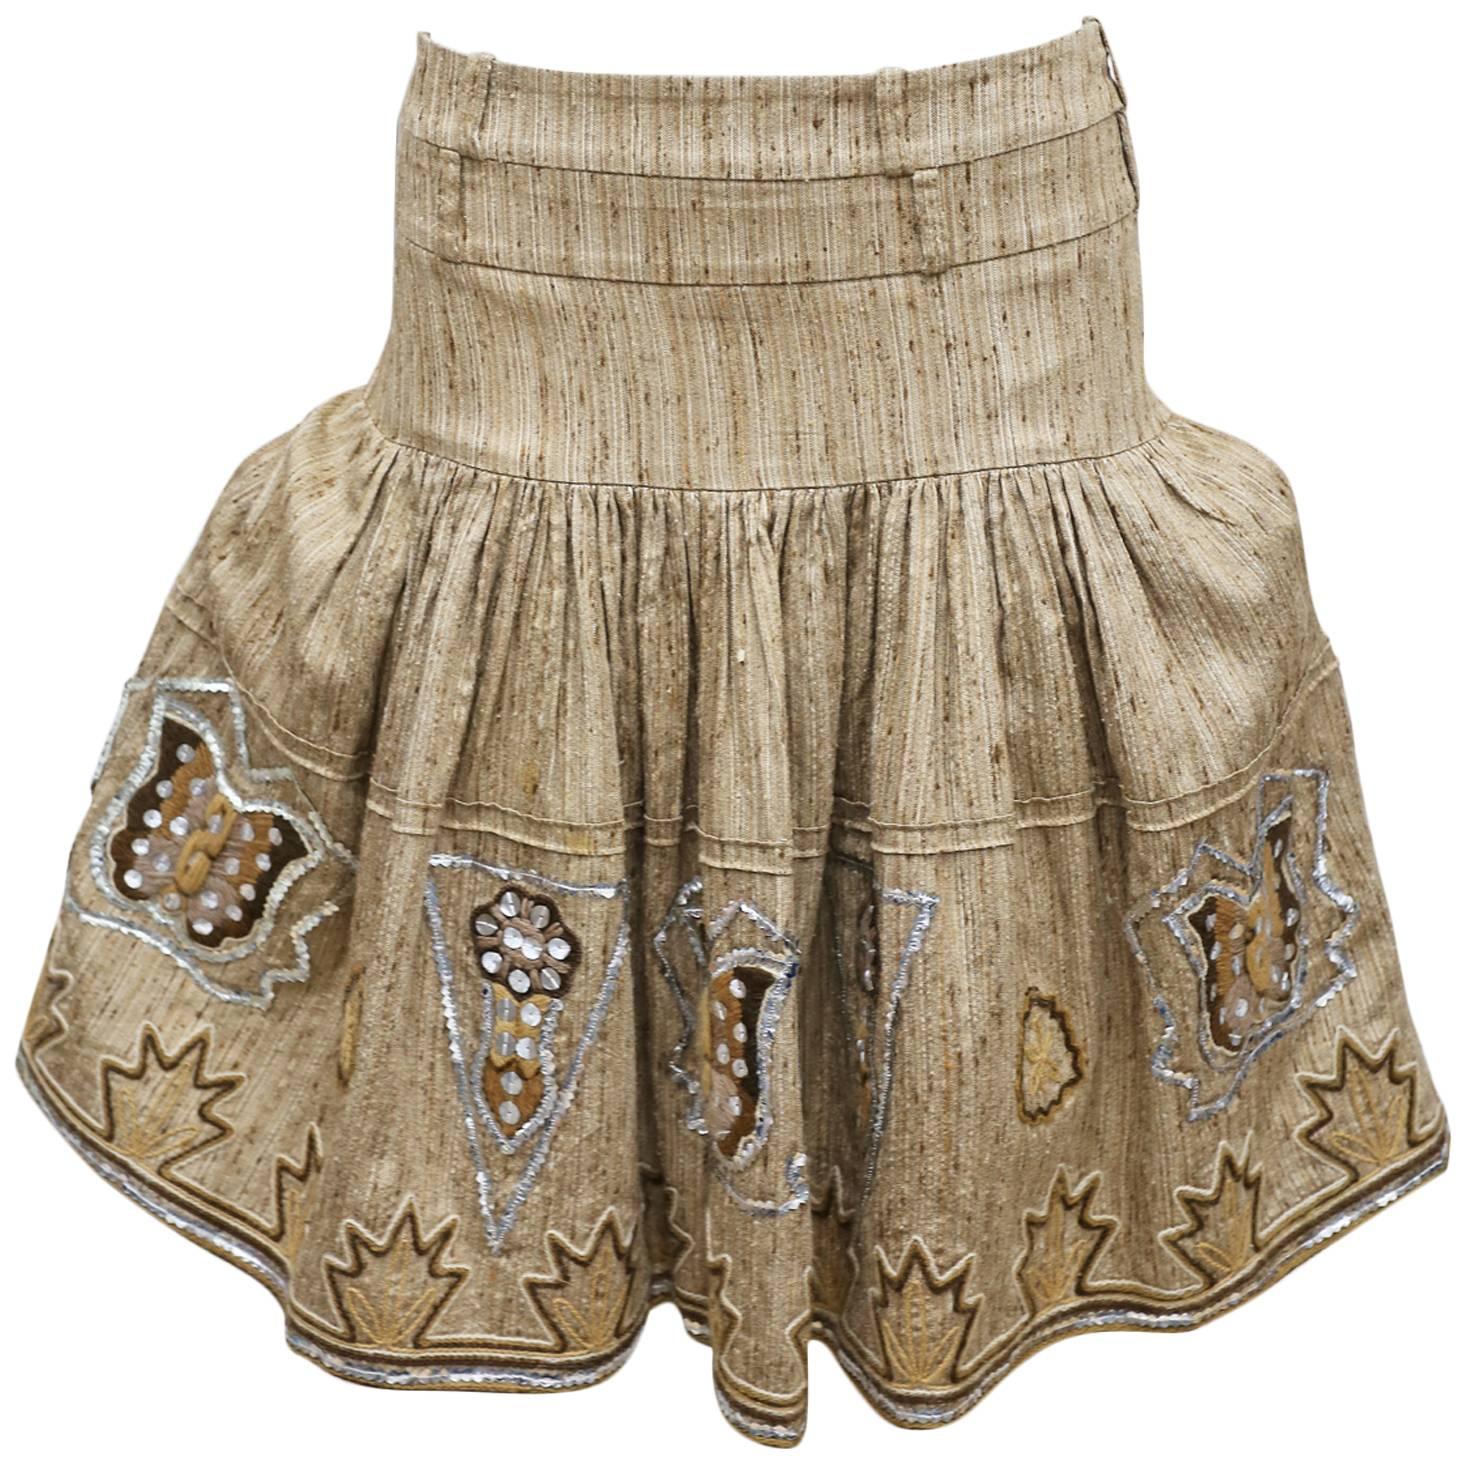 Christian Dior by John Galliano raw silk embroidered tiered skirt, c. 2000s